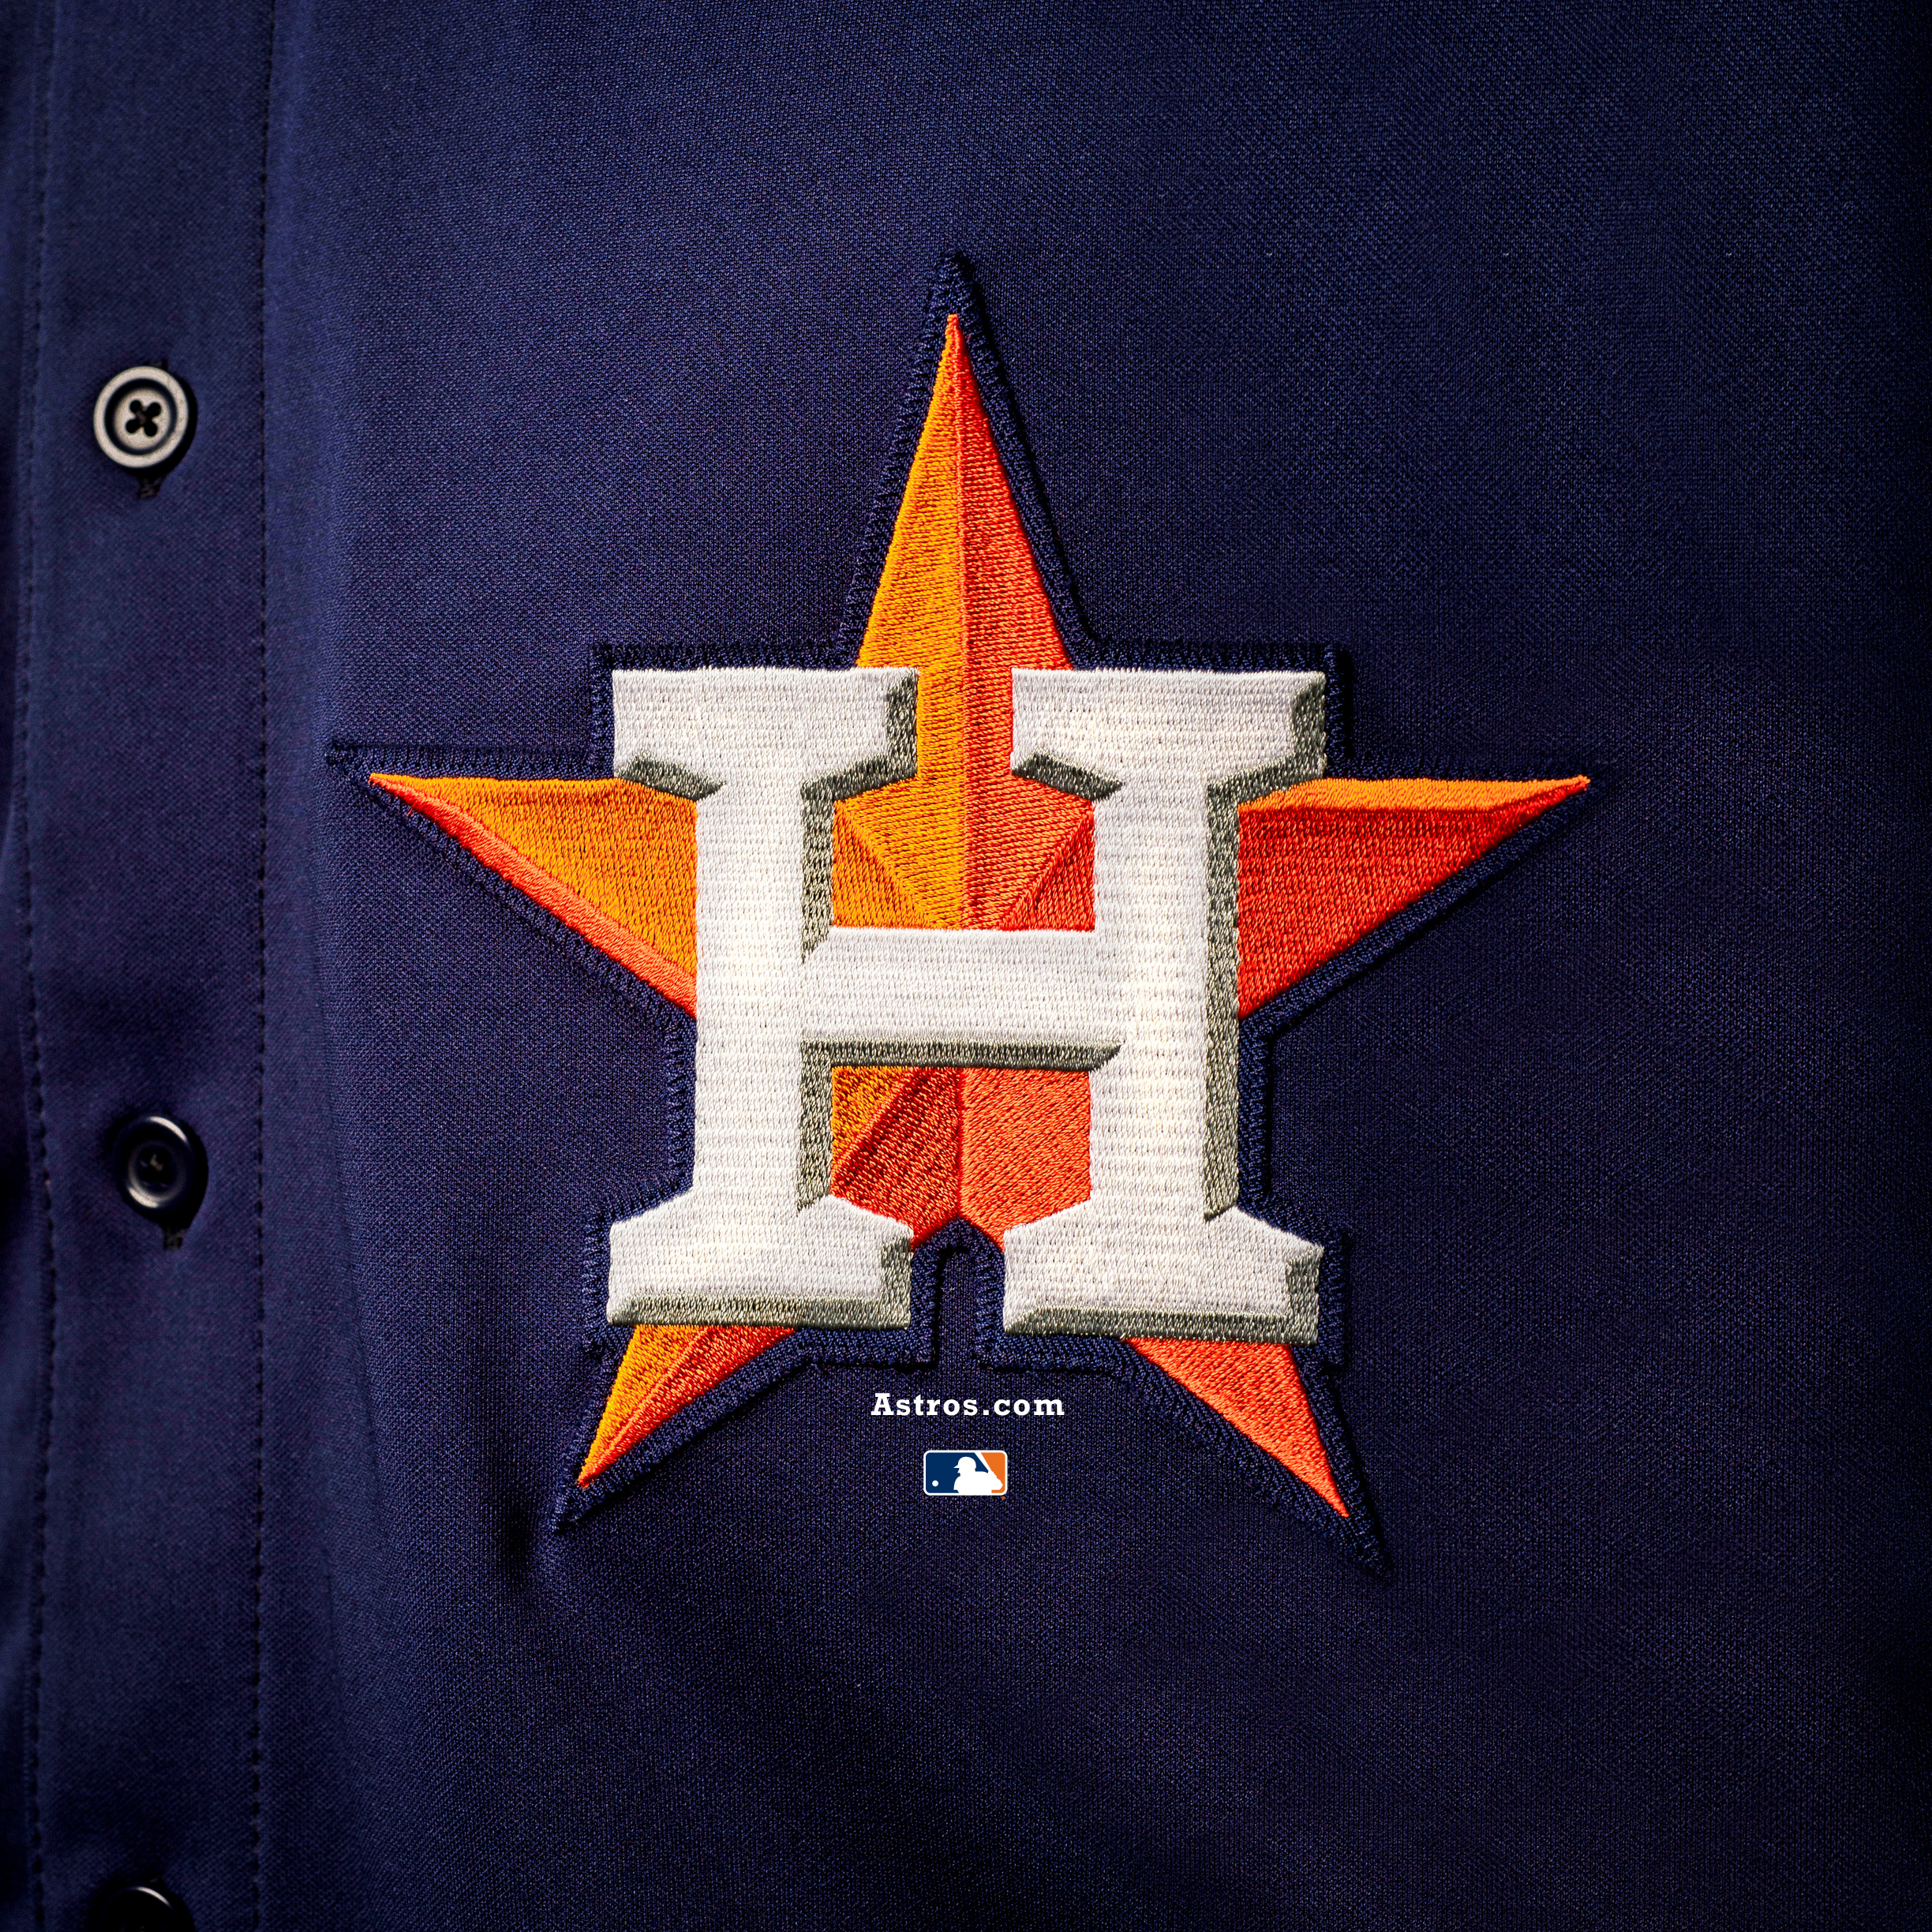 Astros Tablet Wallpaper Players Image Tickets